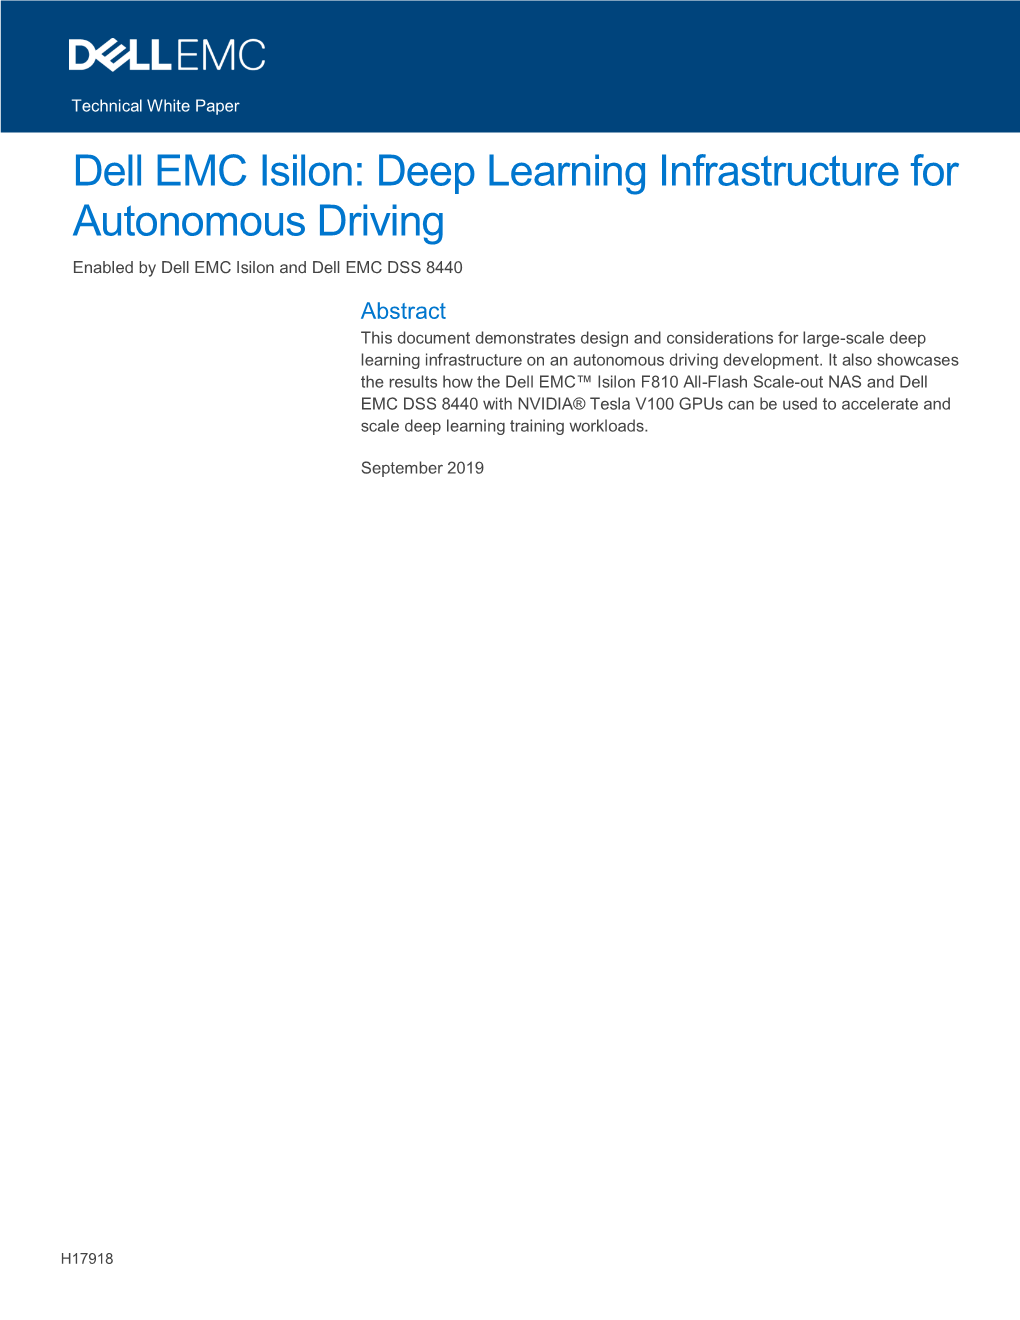 Dell EMC Isilon: Deep Learning Infrastructure for Autonomous Driving Enabled by Dell EMC Isilon and Dell EMC DSS 8440